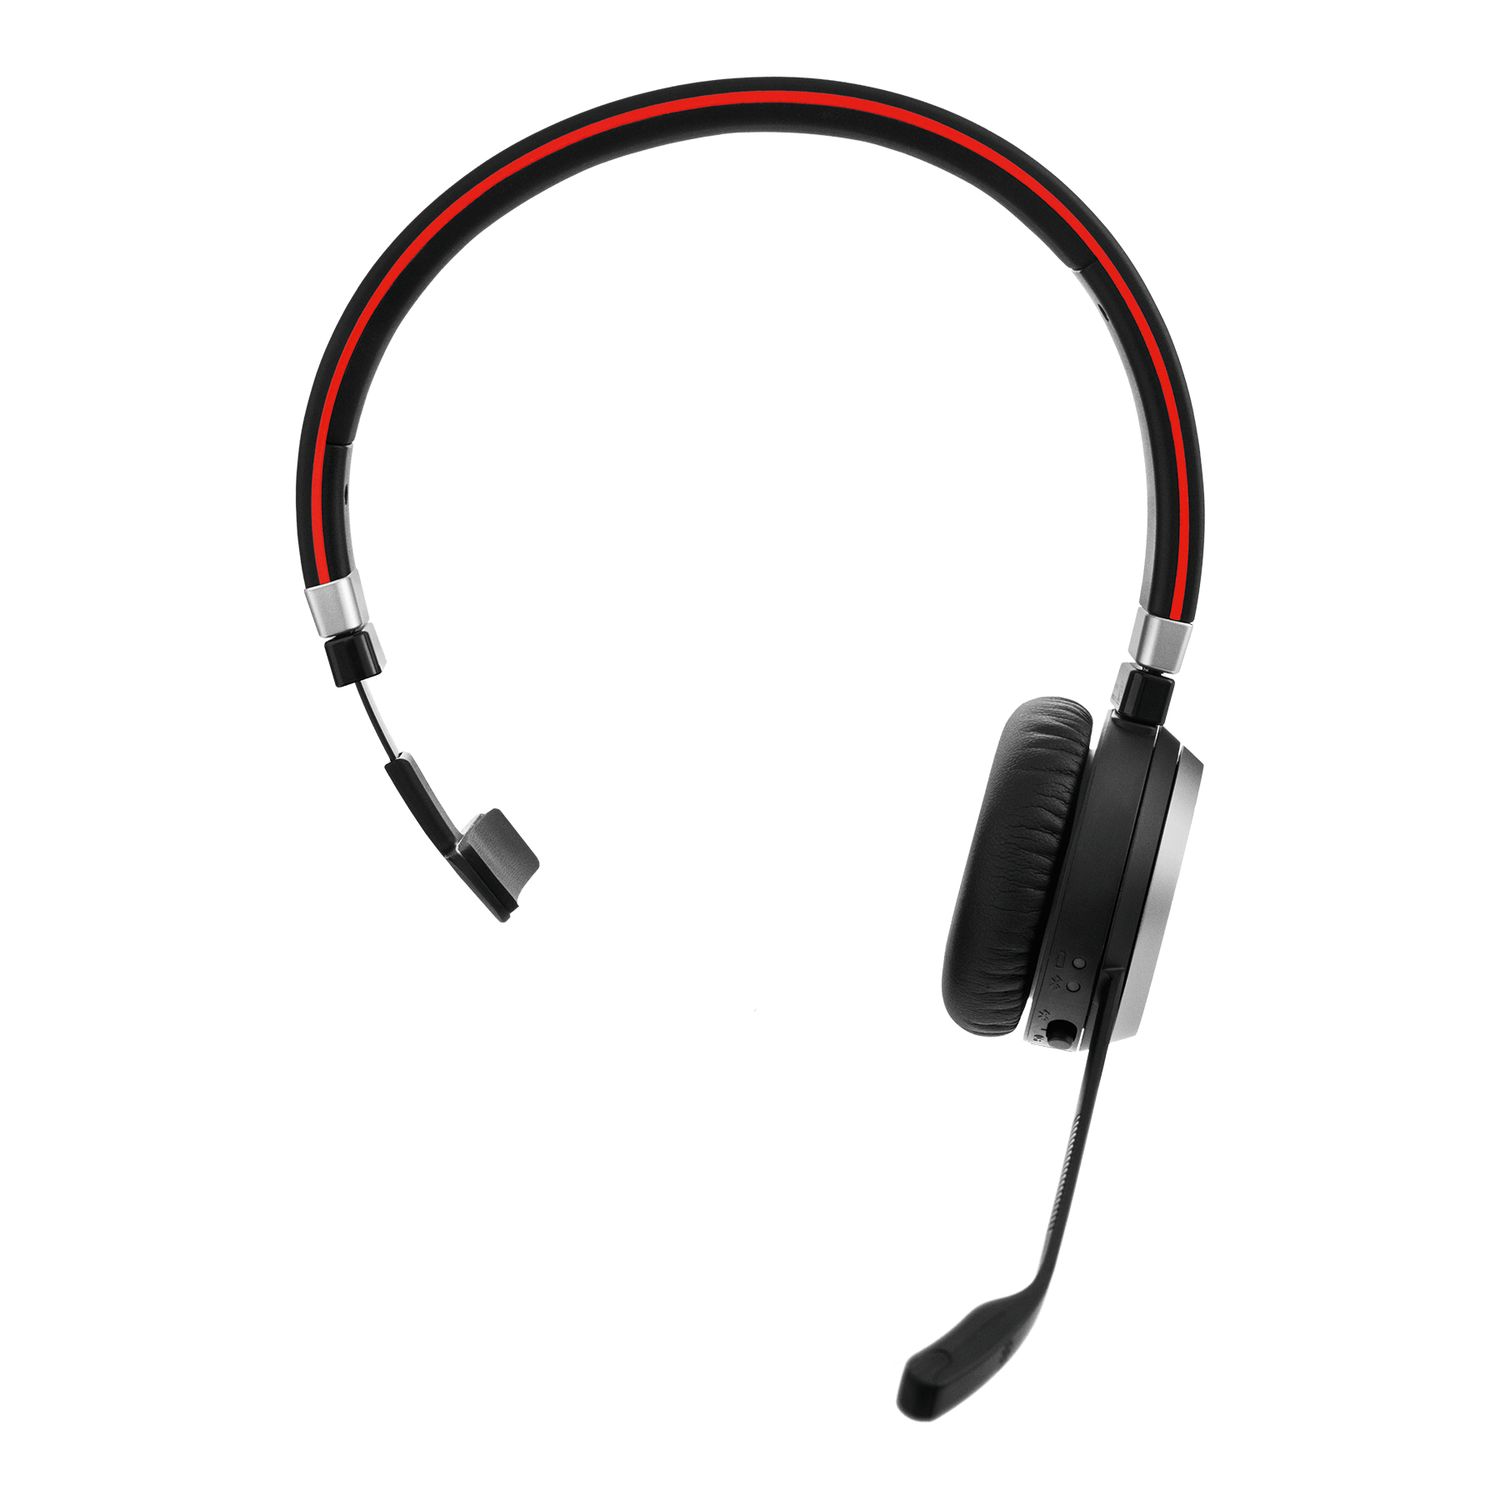 Jabra Evolve 65 Review – Thoughts From a Bot Named Flinch